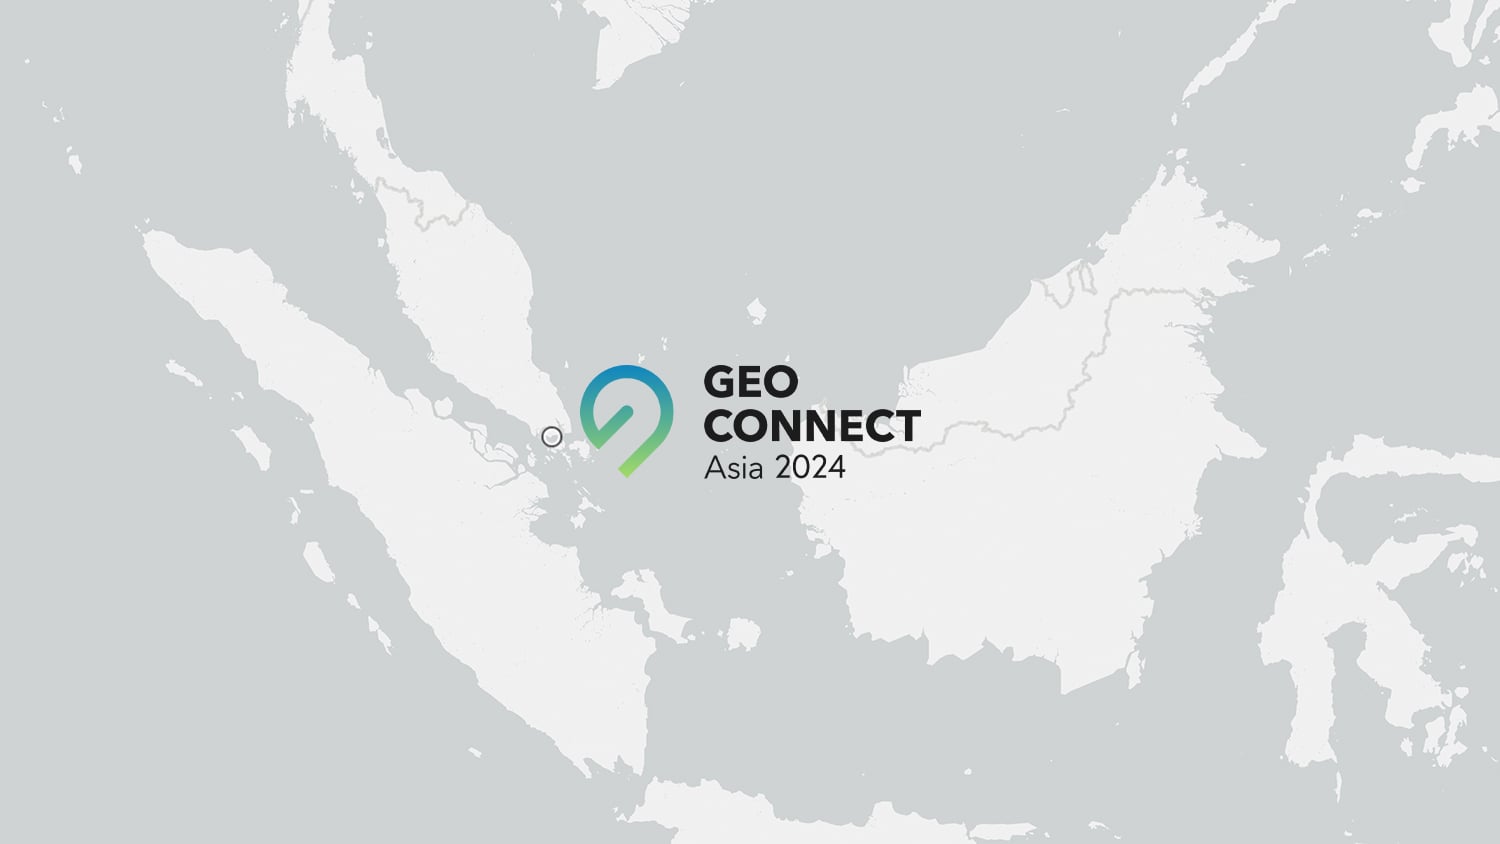 Geo Connect Asia 2024 with Eos Positioning Systems in Singapore